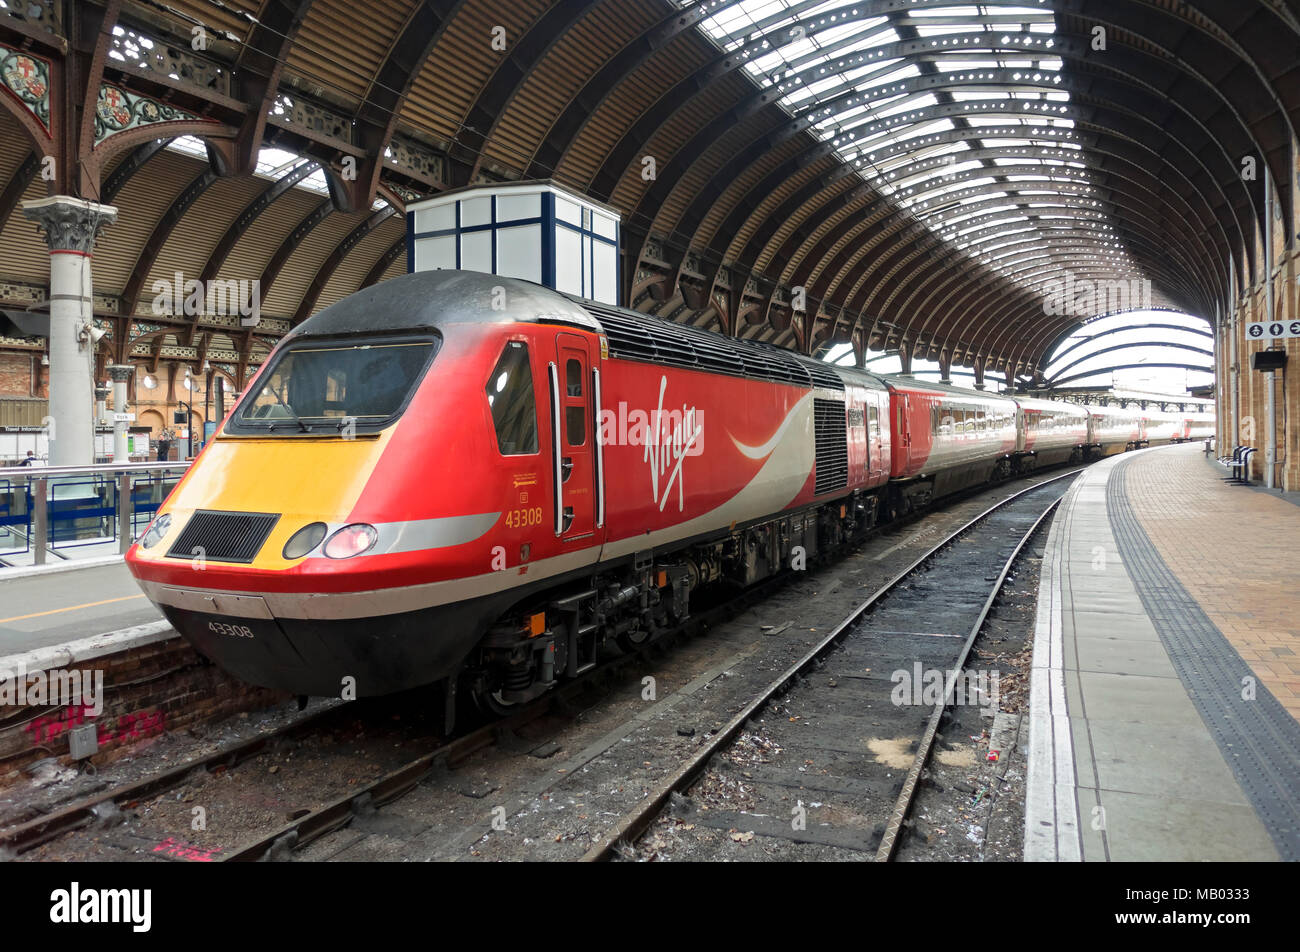 Virgin Trains high speed passenger train waiting at the station. Stock Photo